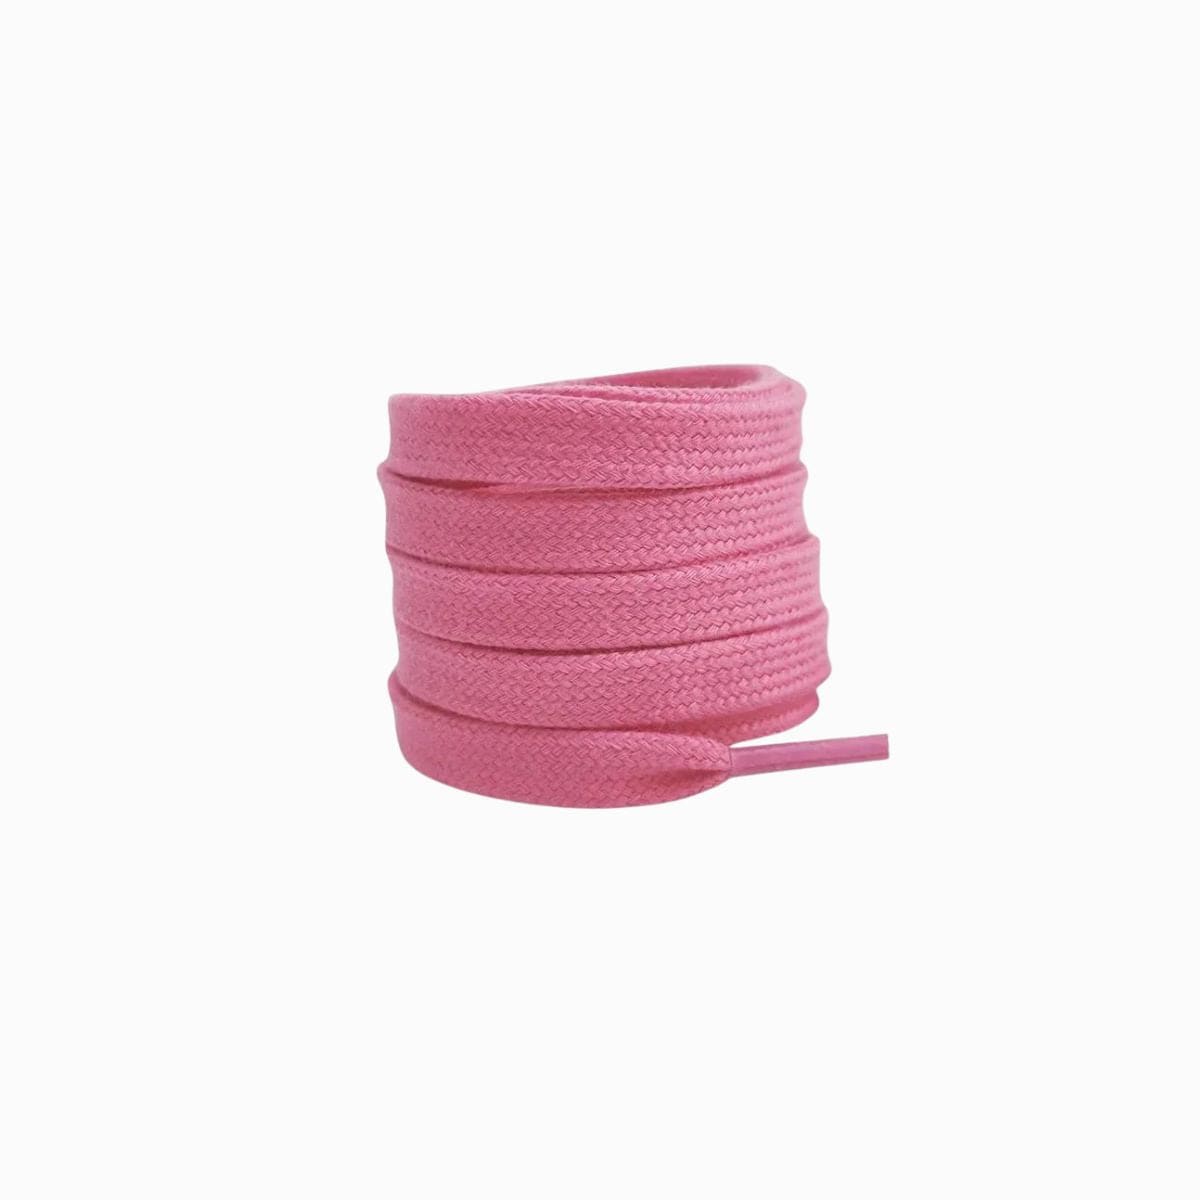 Blush Replacement Adidas Shoe Laces for Adidas Samba ADV Sneakers by Kicks Shoelaces